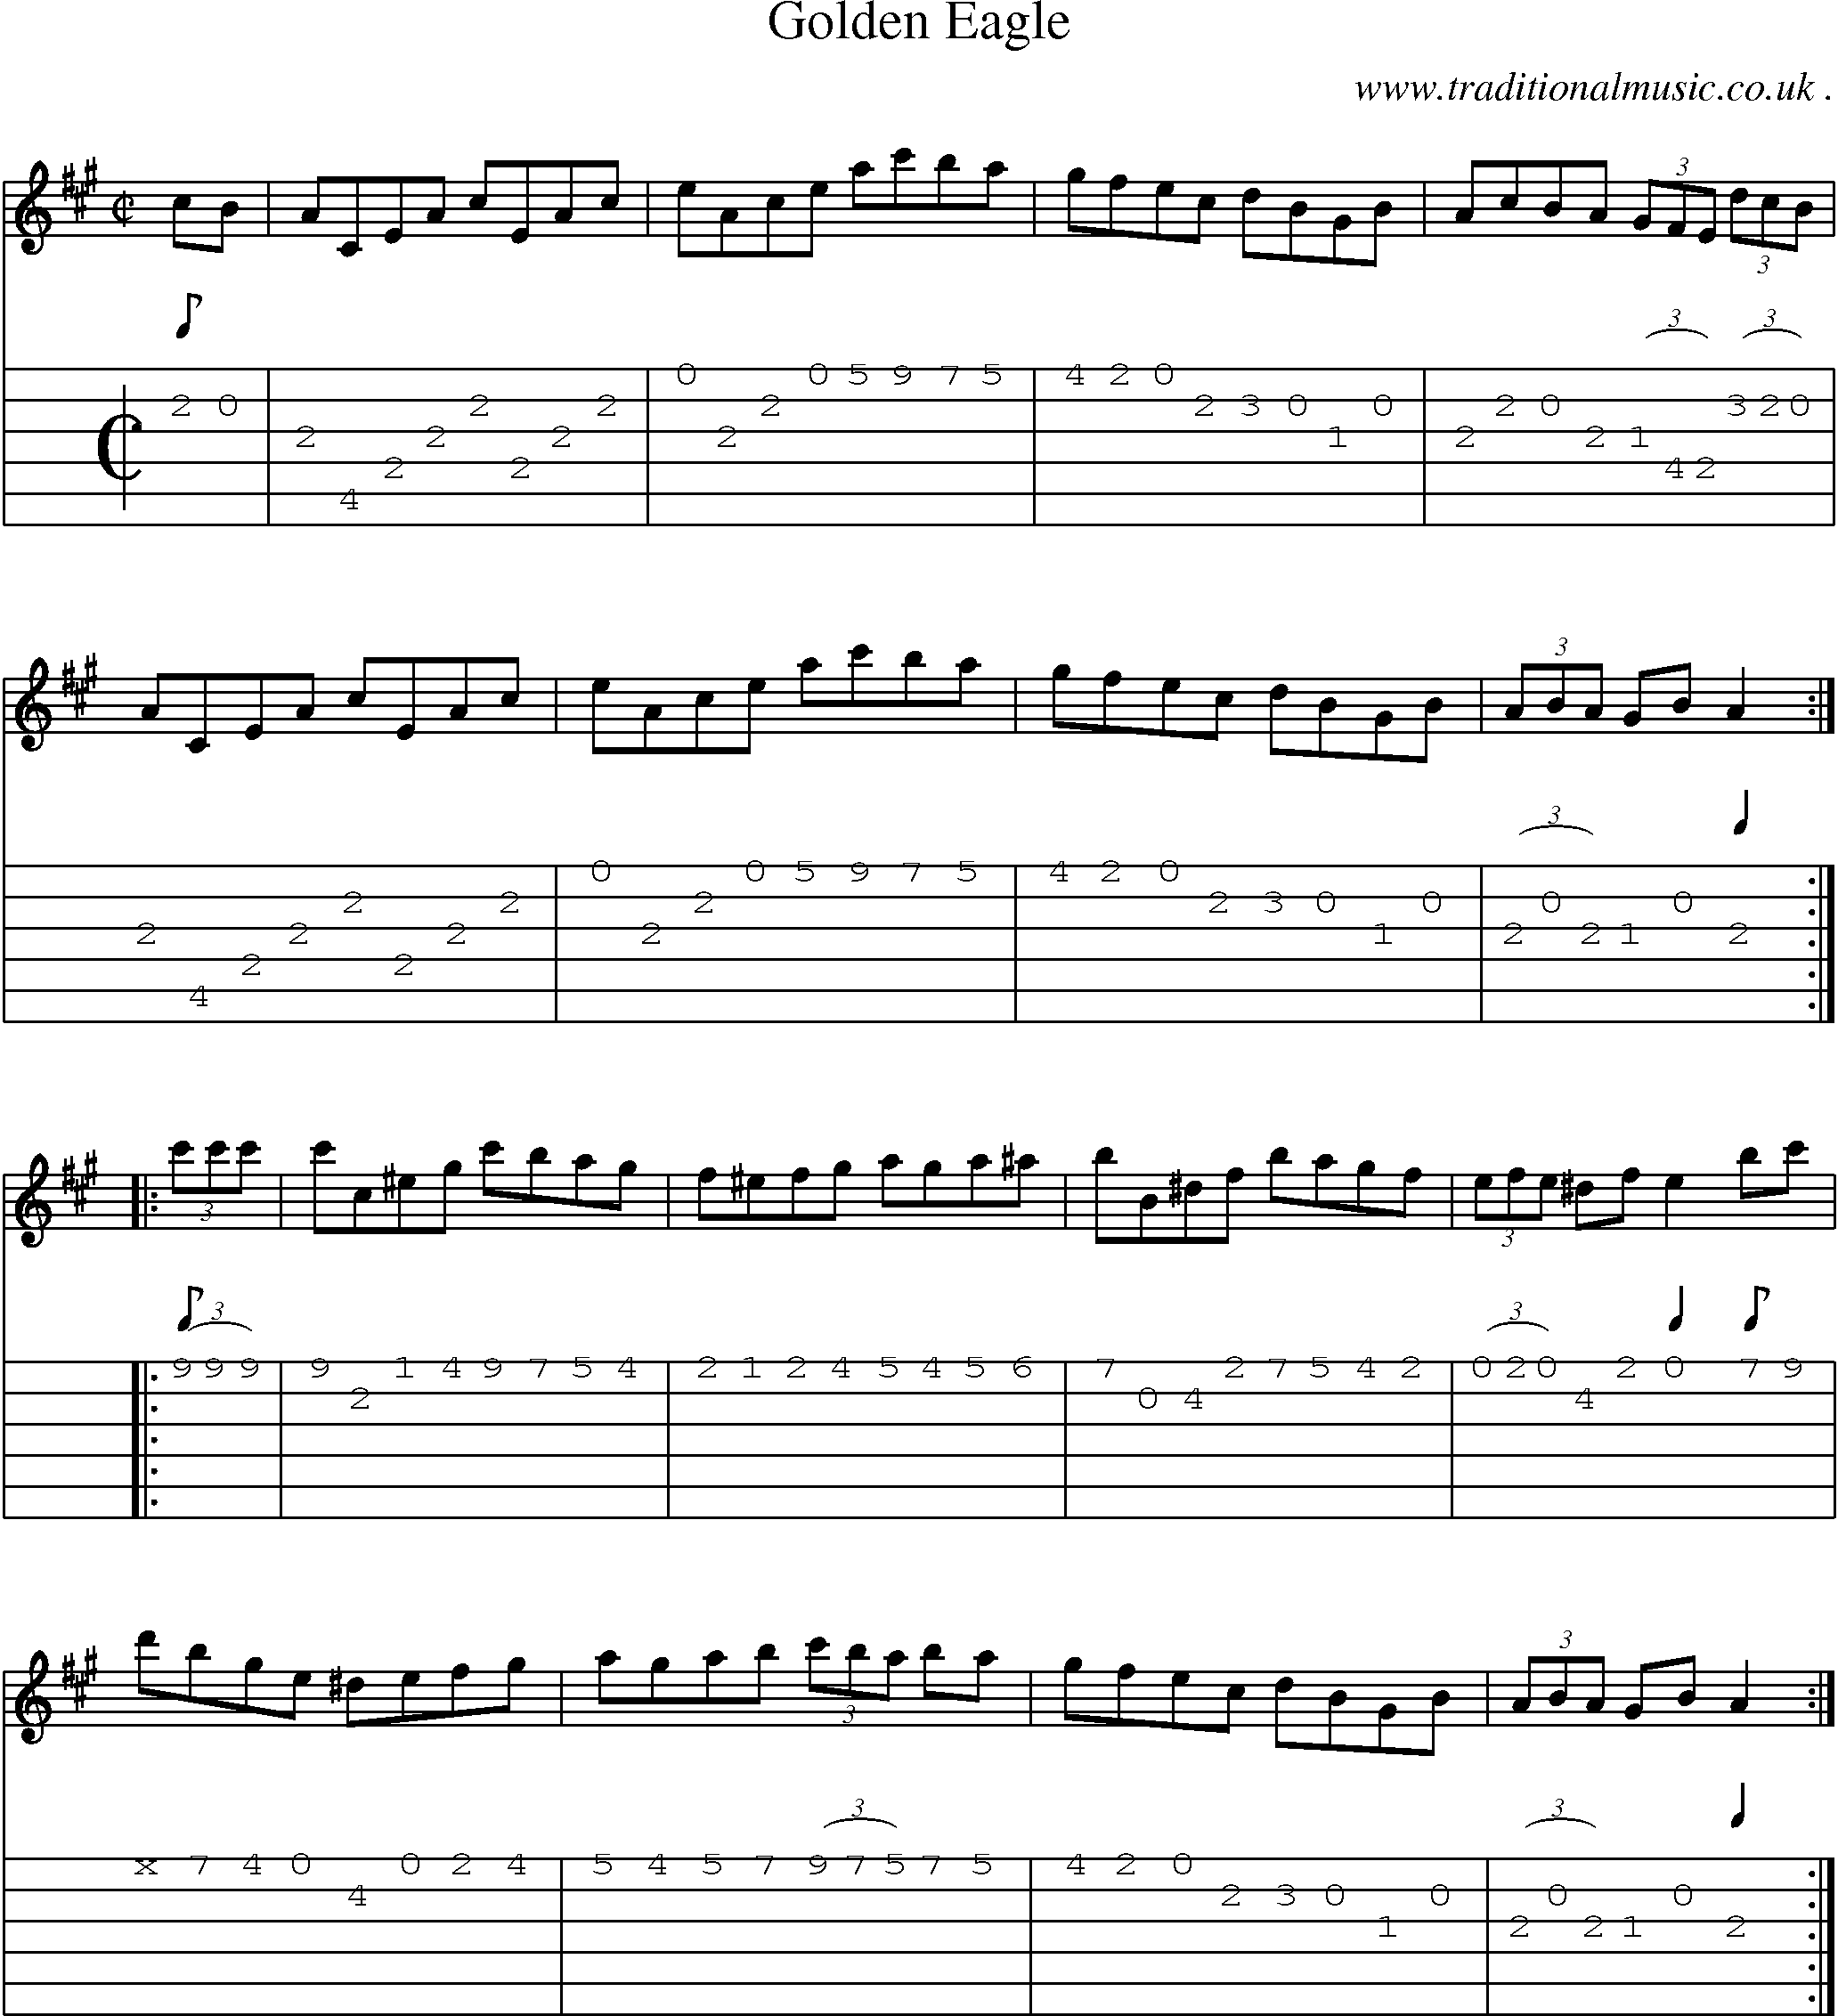 Sheet-Music and Guitar Tabs for Golden Eagle